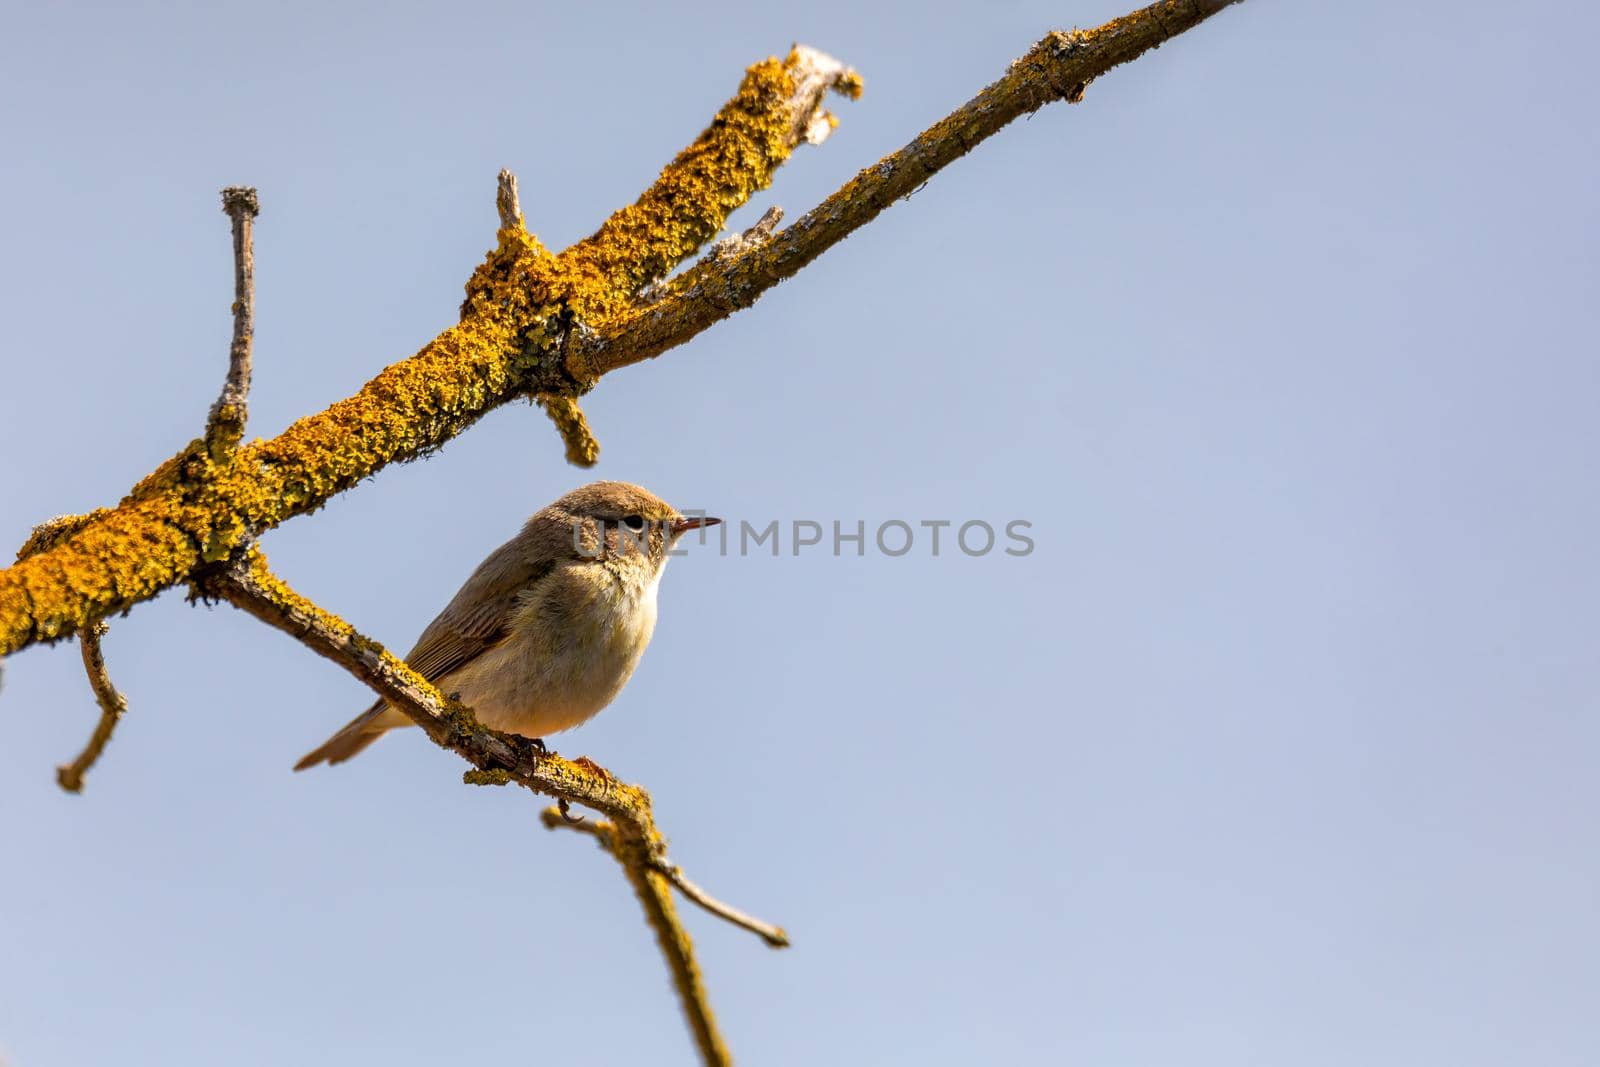 small song bird Willow Warbler (Phylloscopus trochilus) sitting on the branch. Little songbird in the natural habitat. Spring time. Czech Republic, Europe wildlife